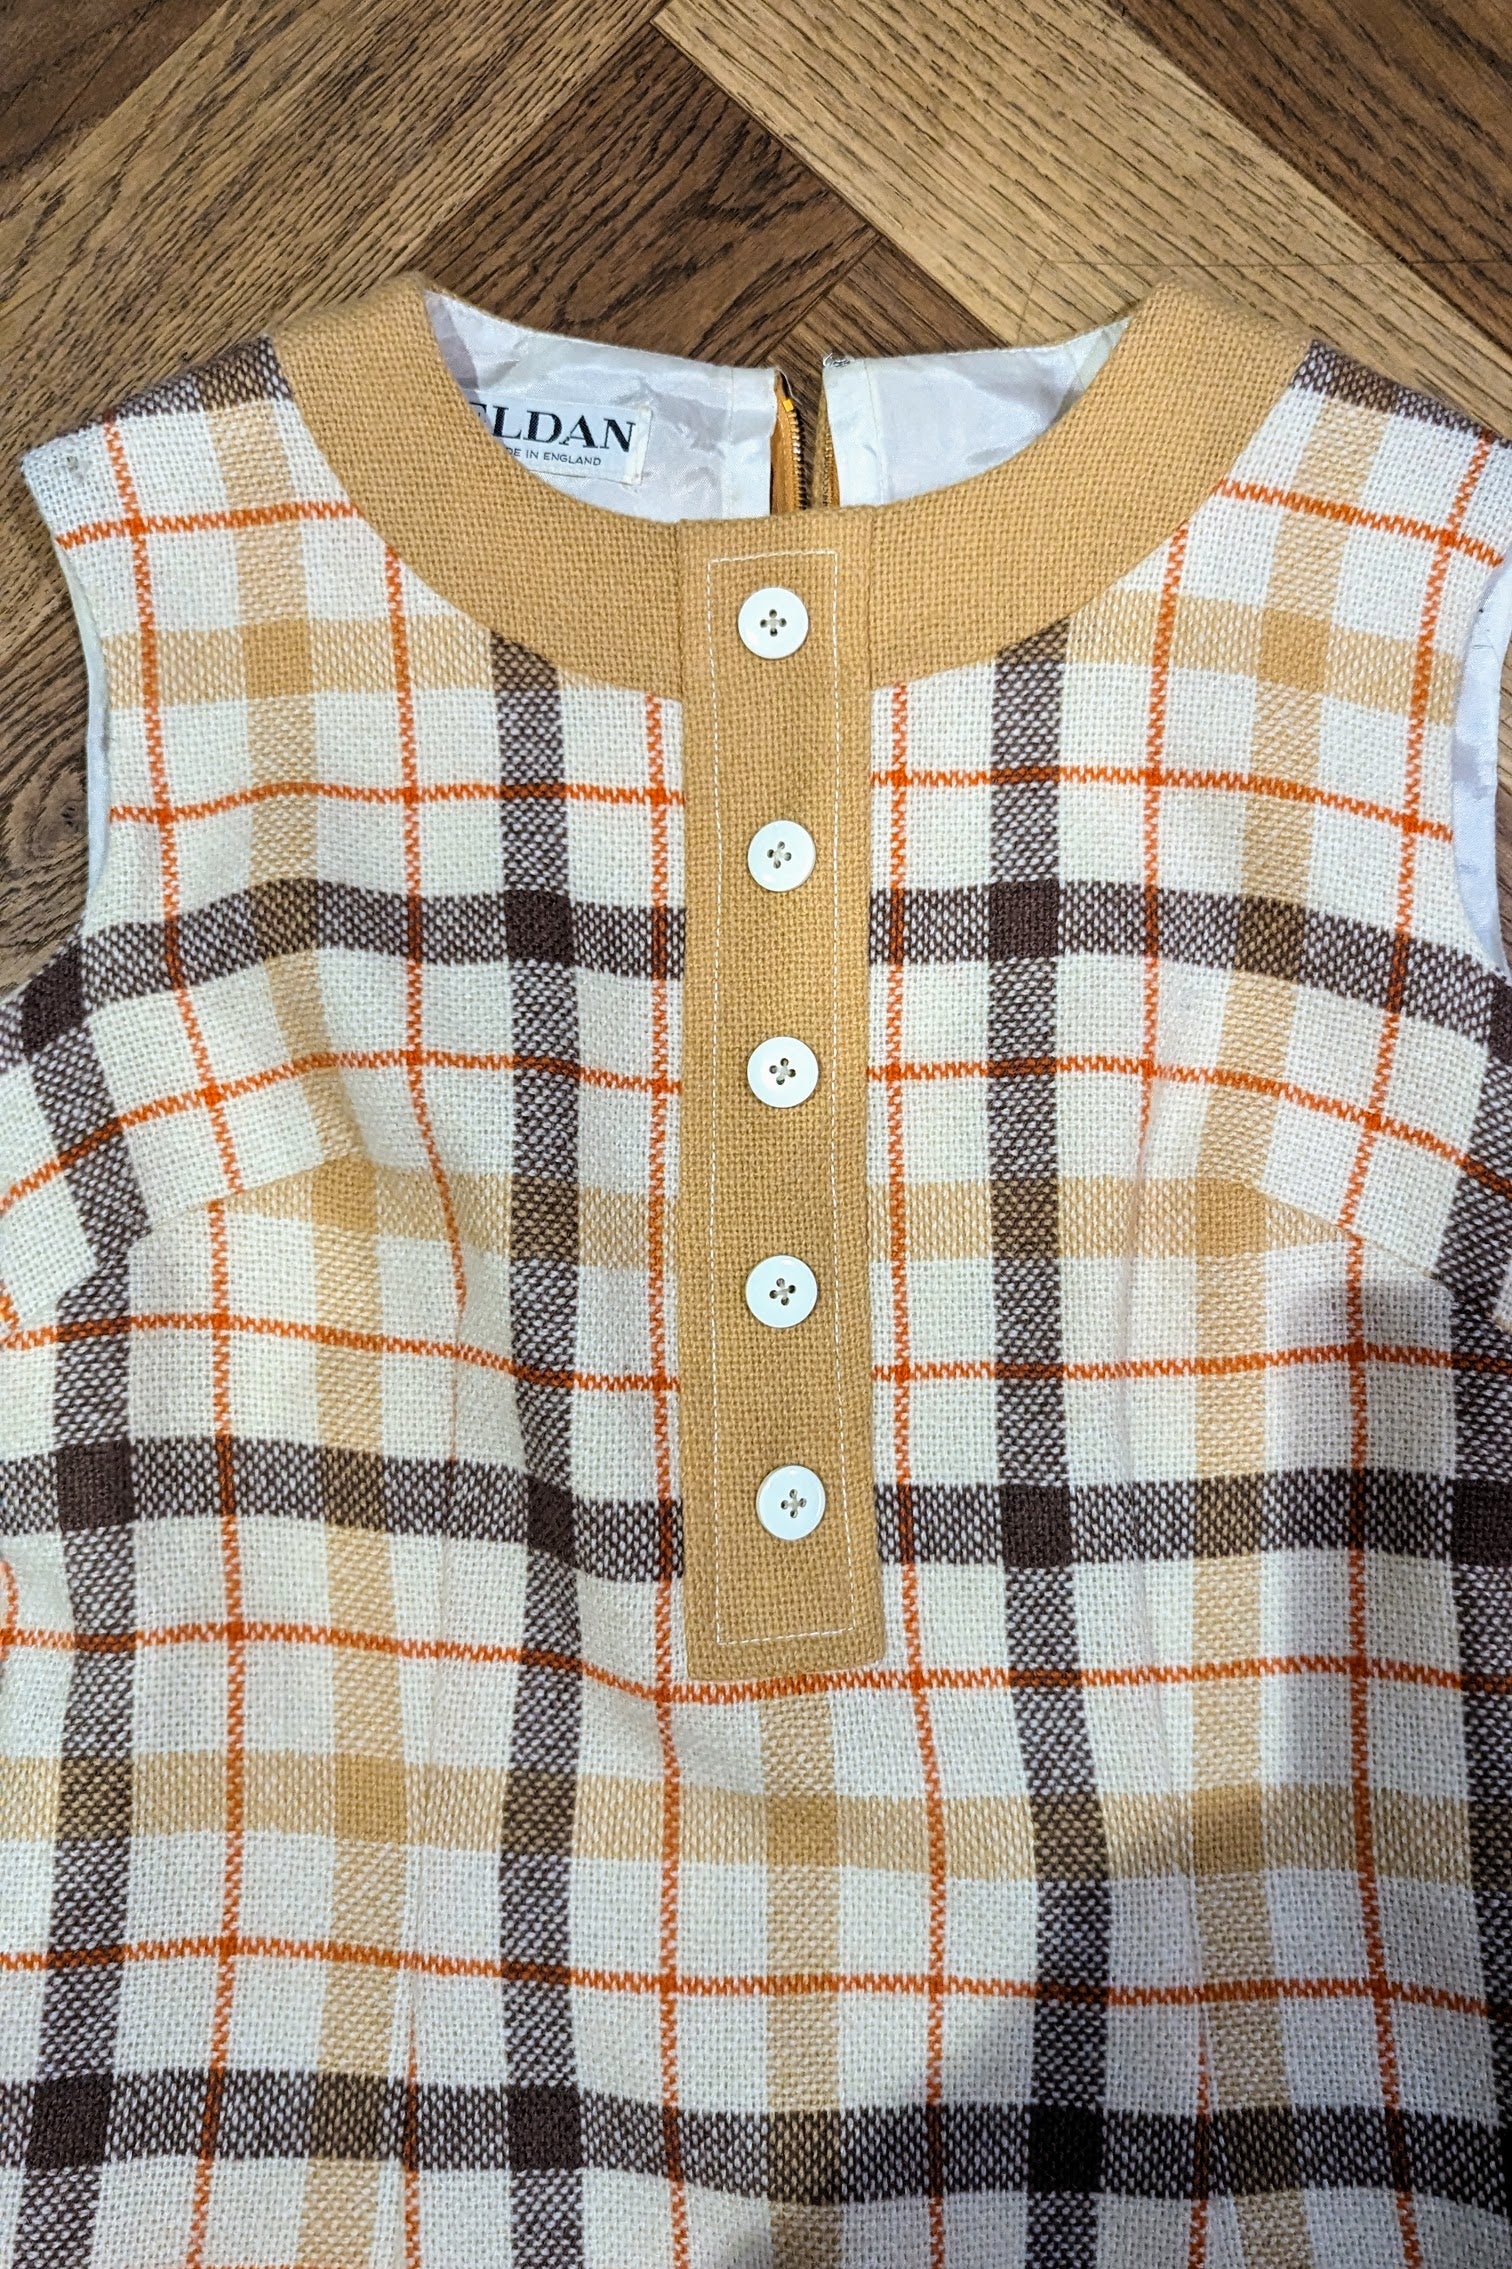 wear to material on shoulder of checked dress